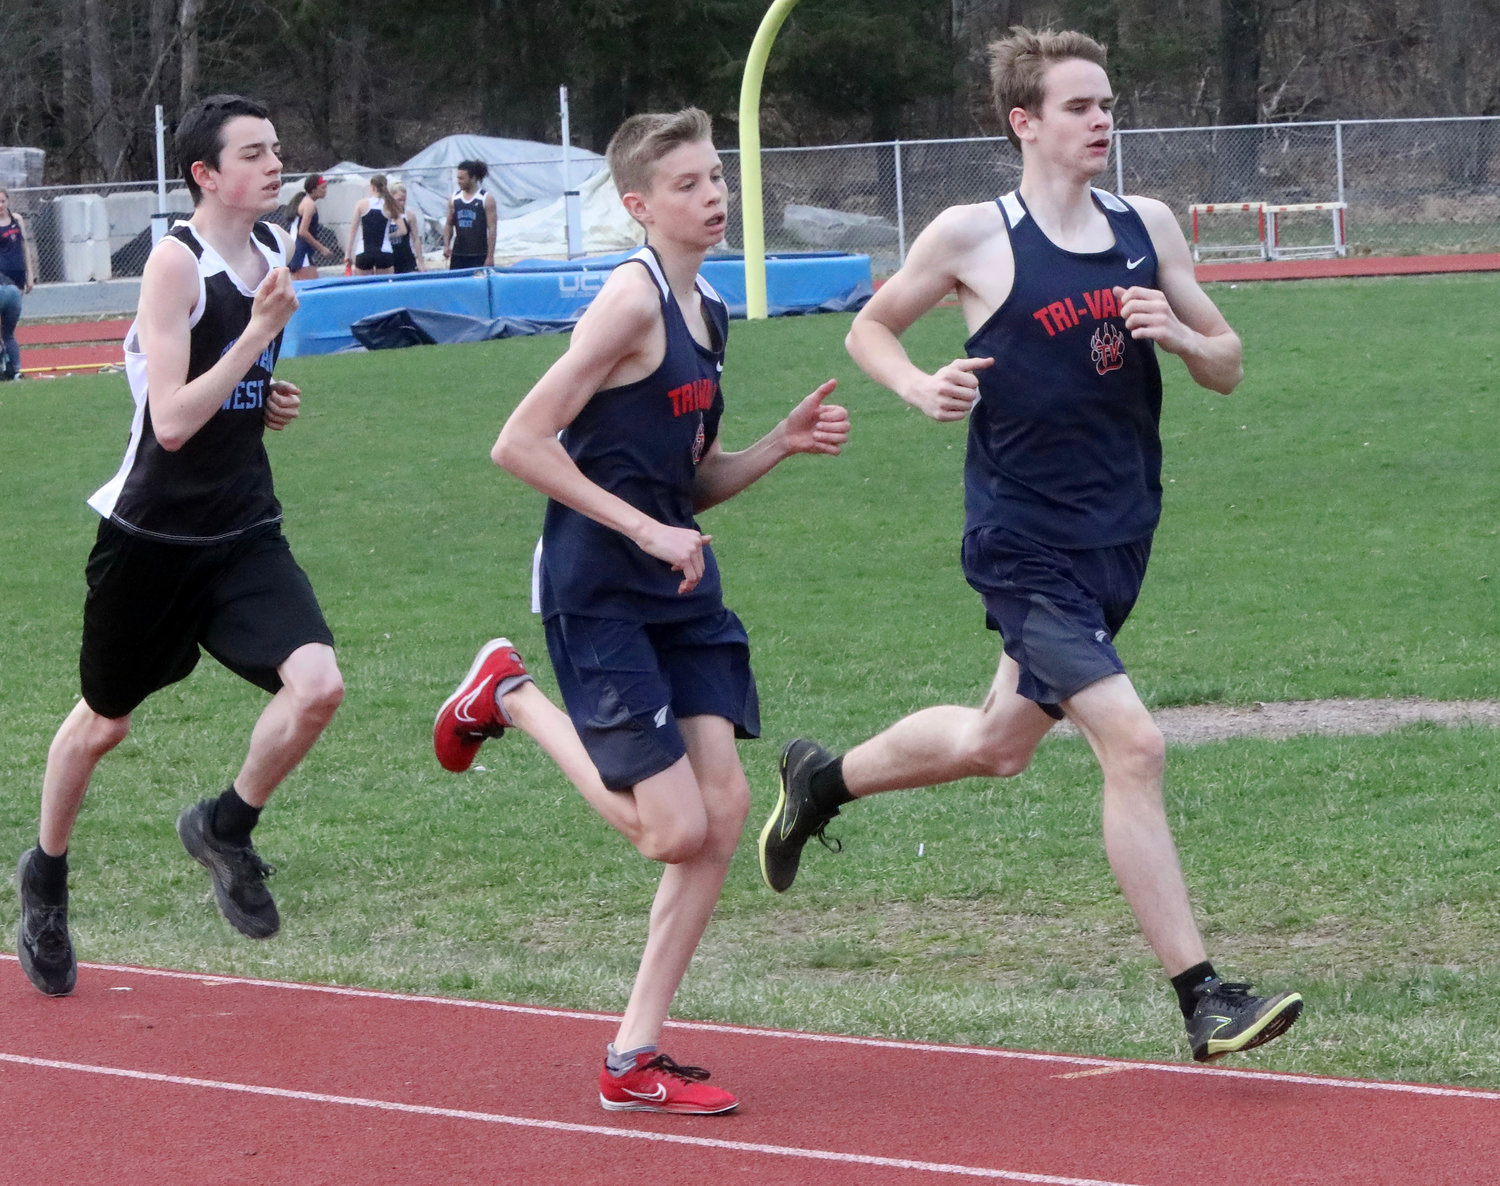 Finishing in order in the 3200 were Tri-Valley’s Craig Costa, T-V’s Van Furman and SW’s Landon Volpe.